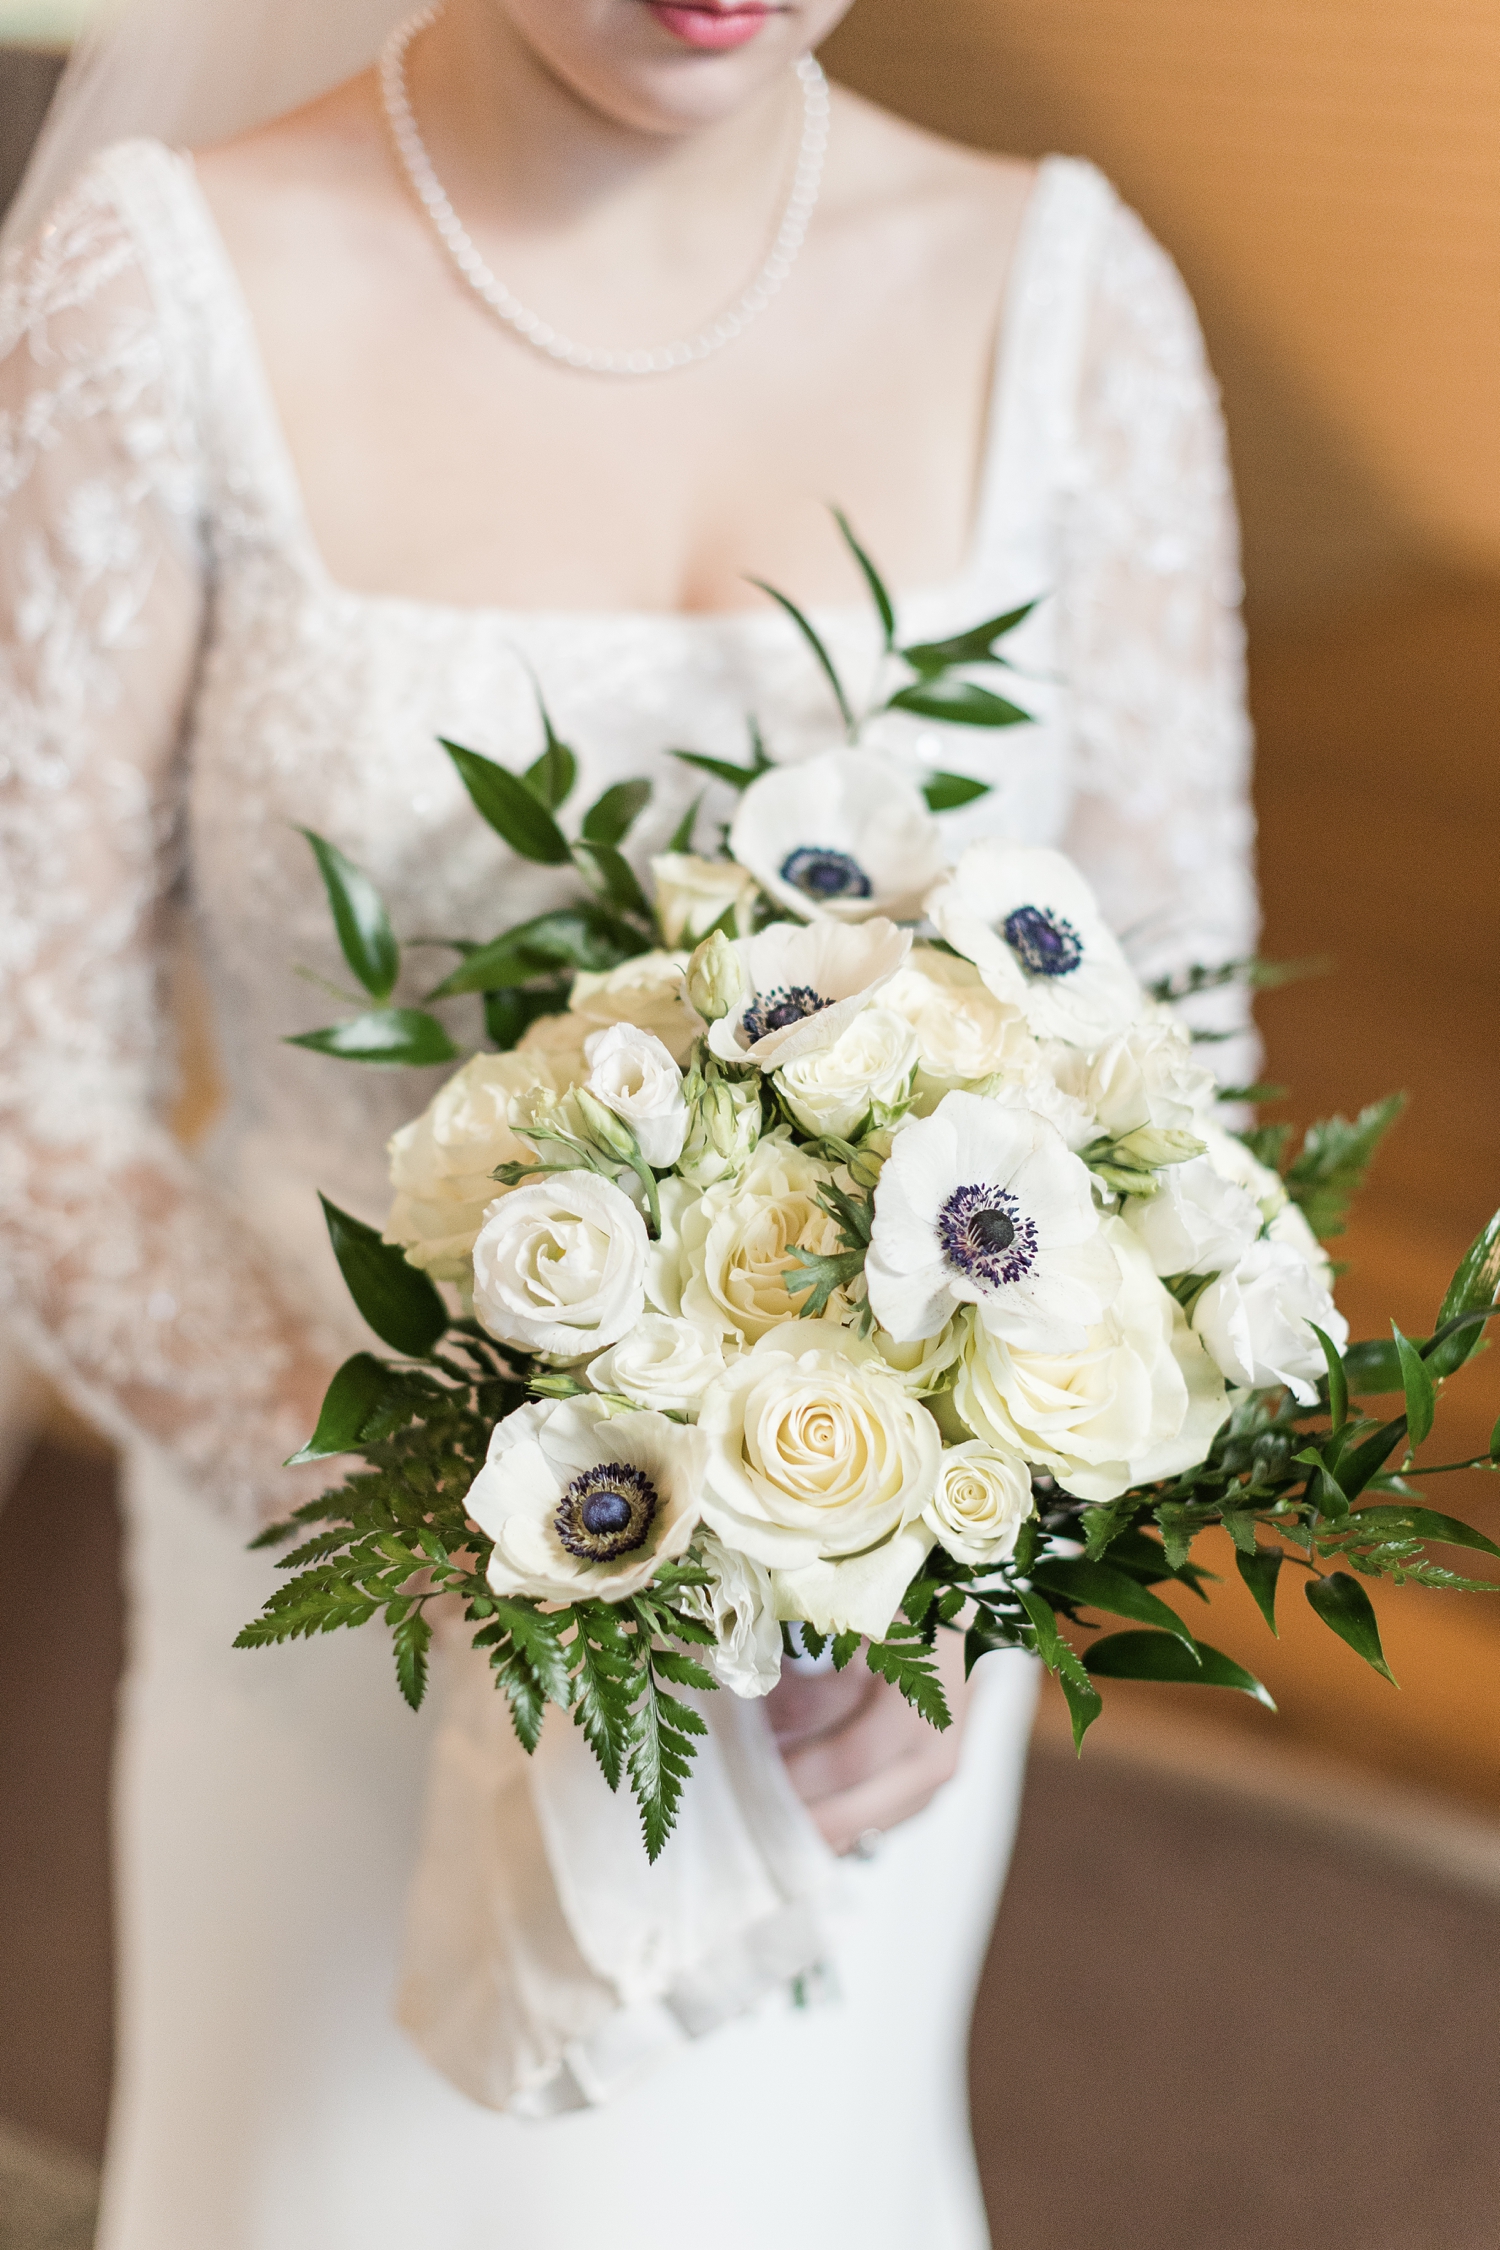 Stunning all white wedding bouquet with white roses and anemones | CB Studio